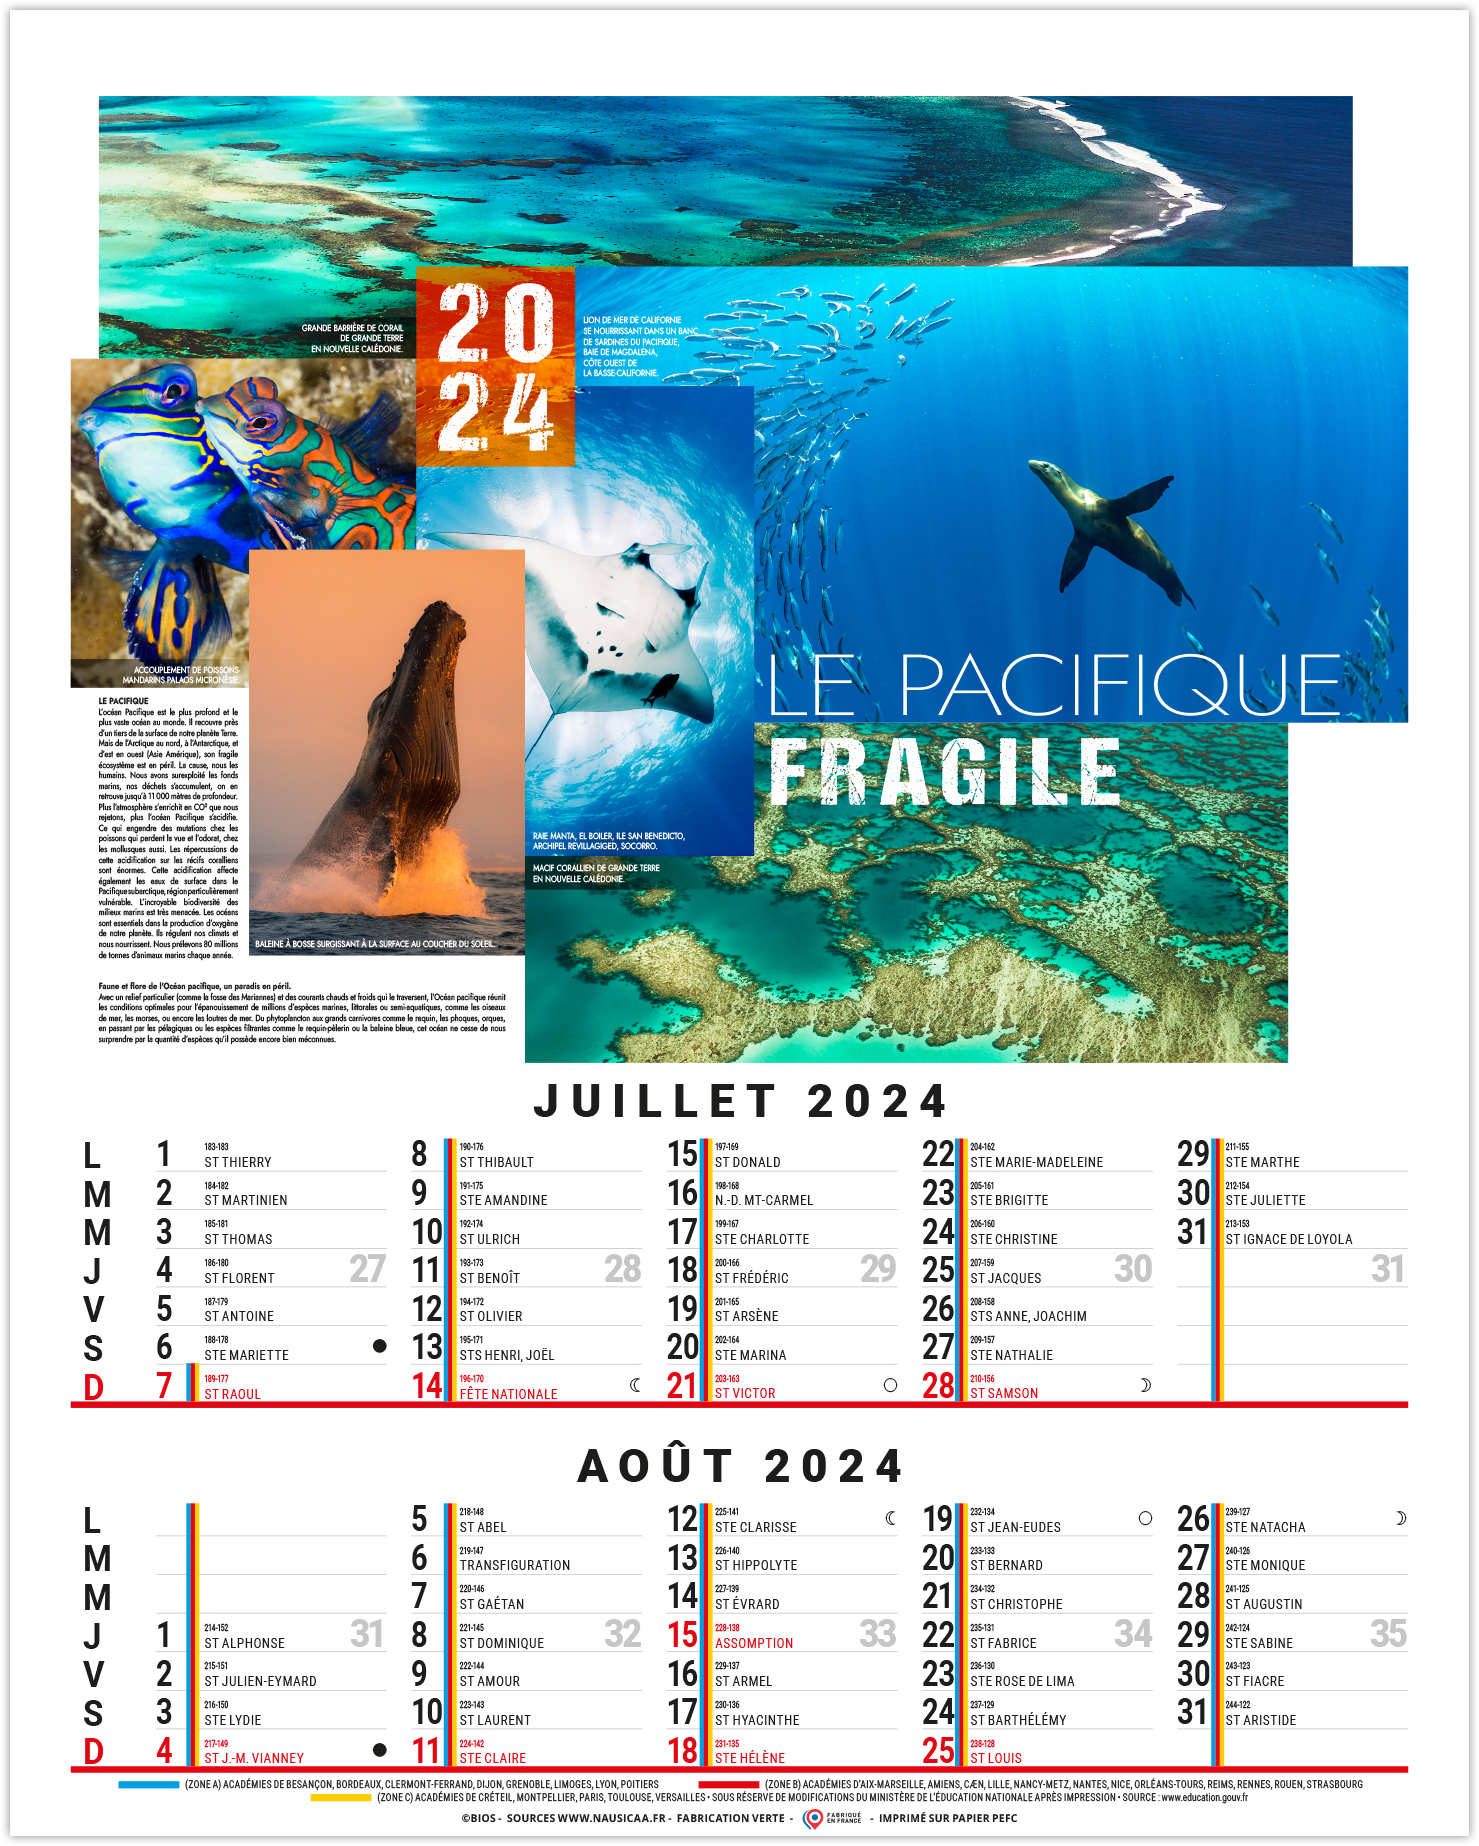 https://www.calendriers-publicitaires-pro.com/images/calendrier-publicitaire/produit/calendrier-2024/large/bloc-personnalise-theo-240-x-410-4.jpg